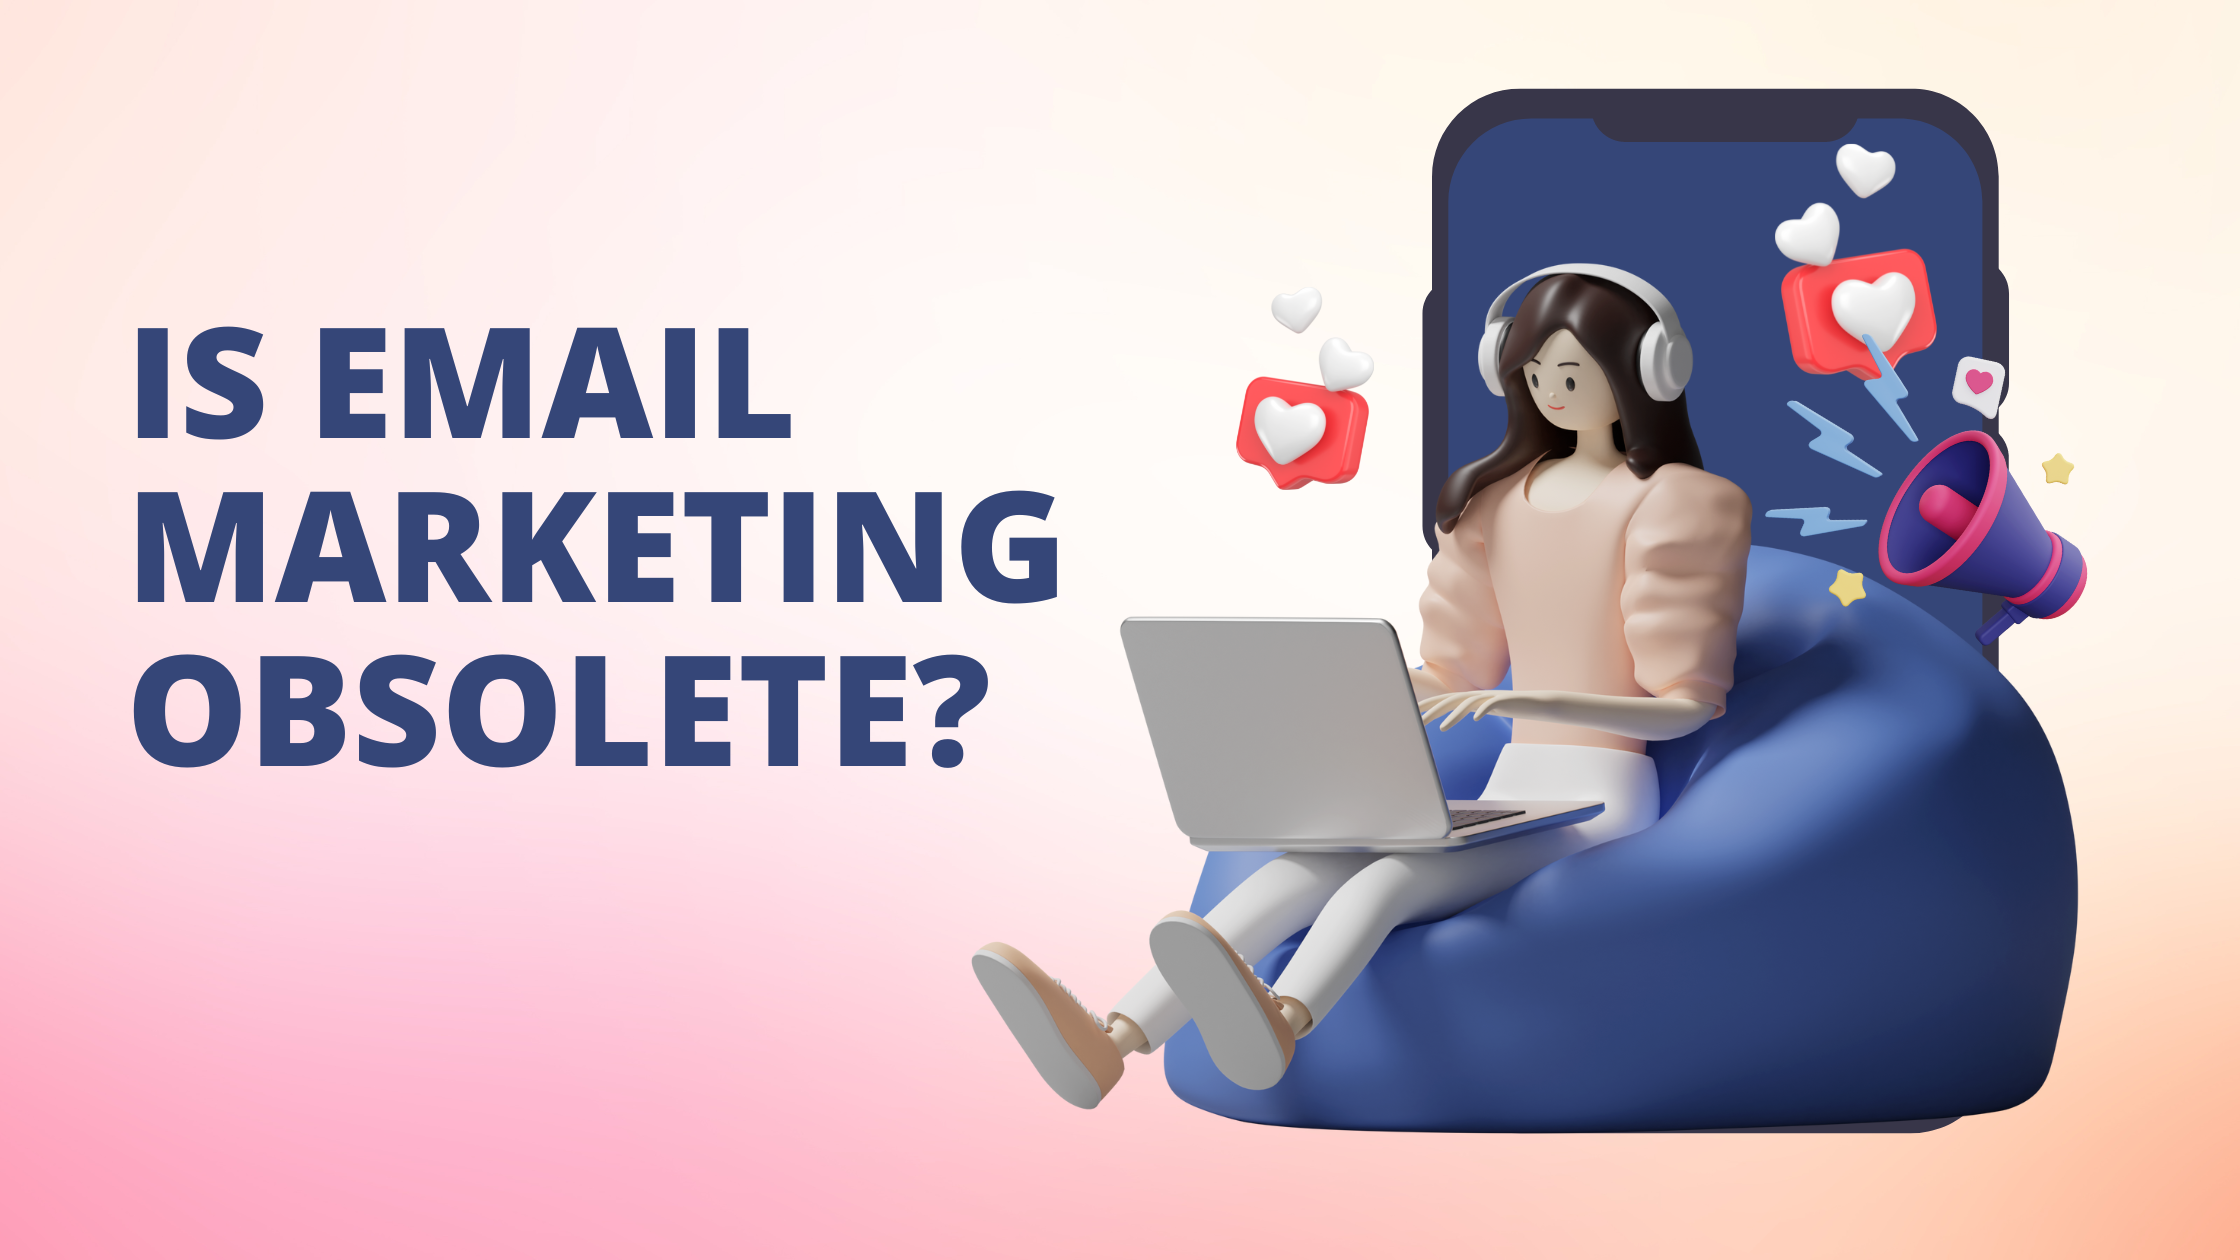 Is Email Marketing just another obsolete way of reaching out?